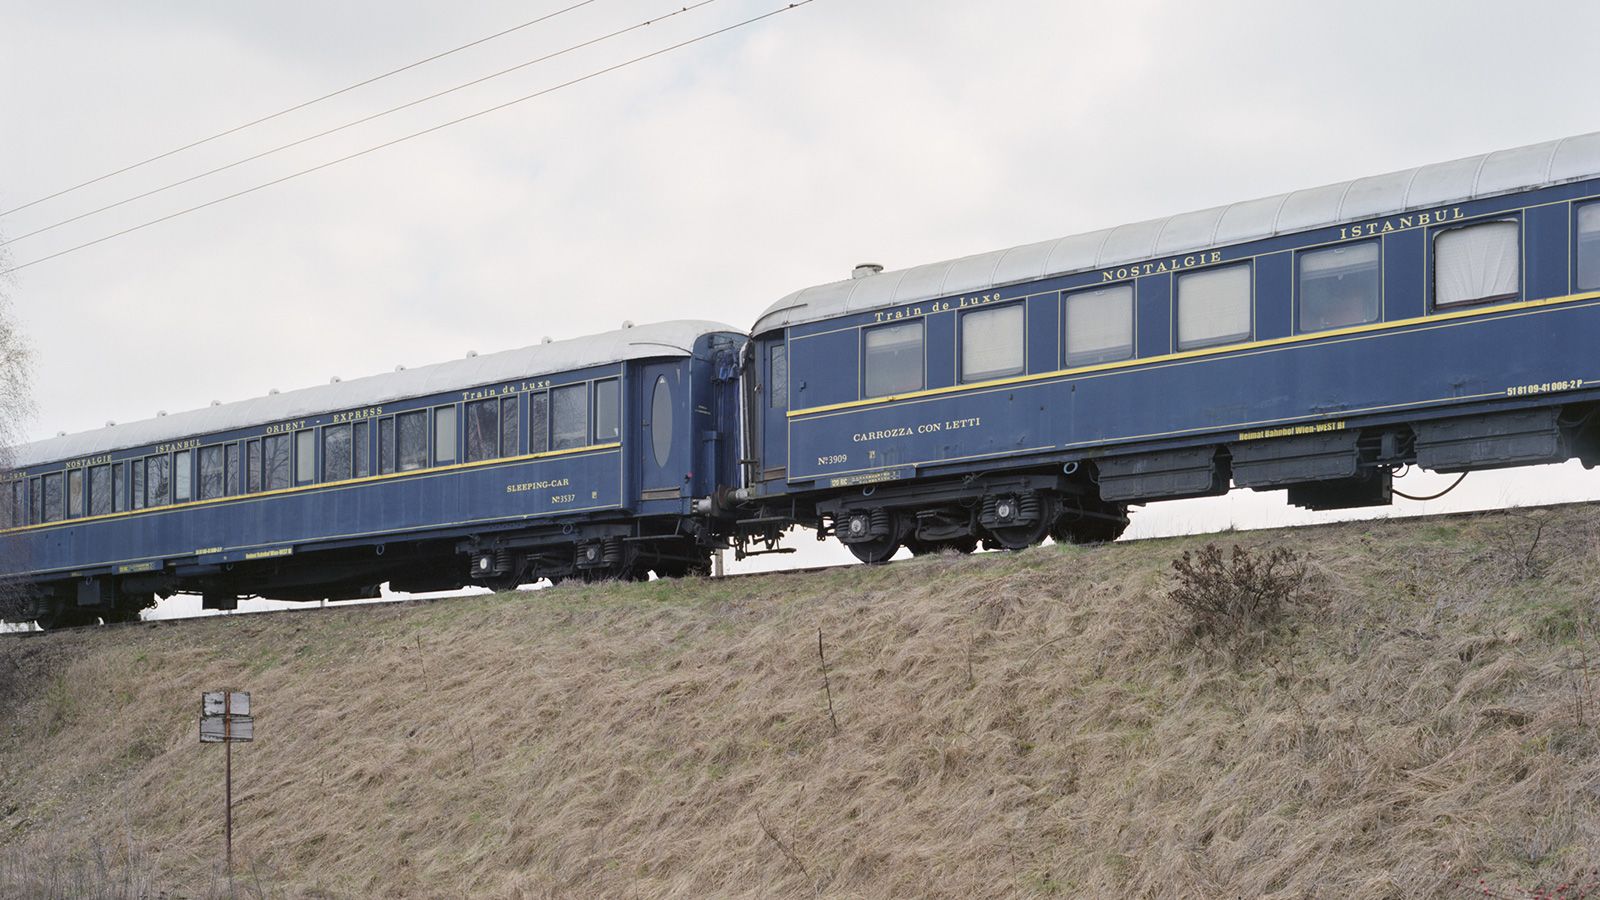 More than just a 'mystery' train, the Orient Express whisked the elite  across Europe in luxury and style